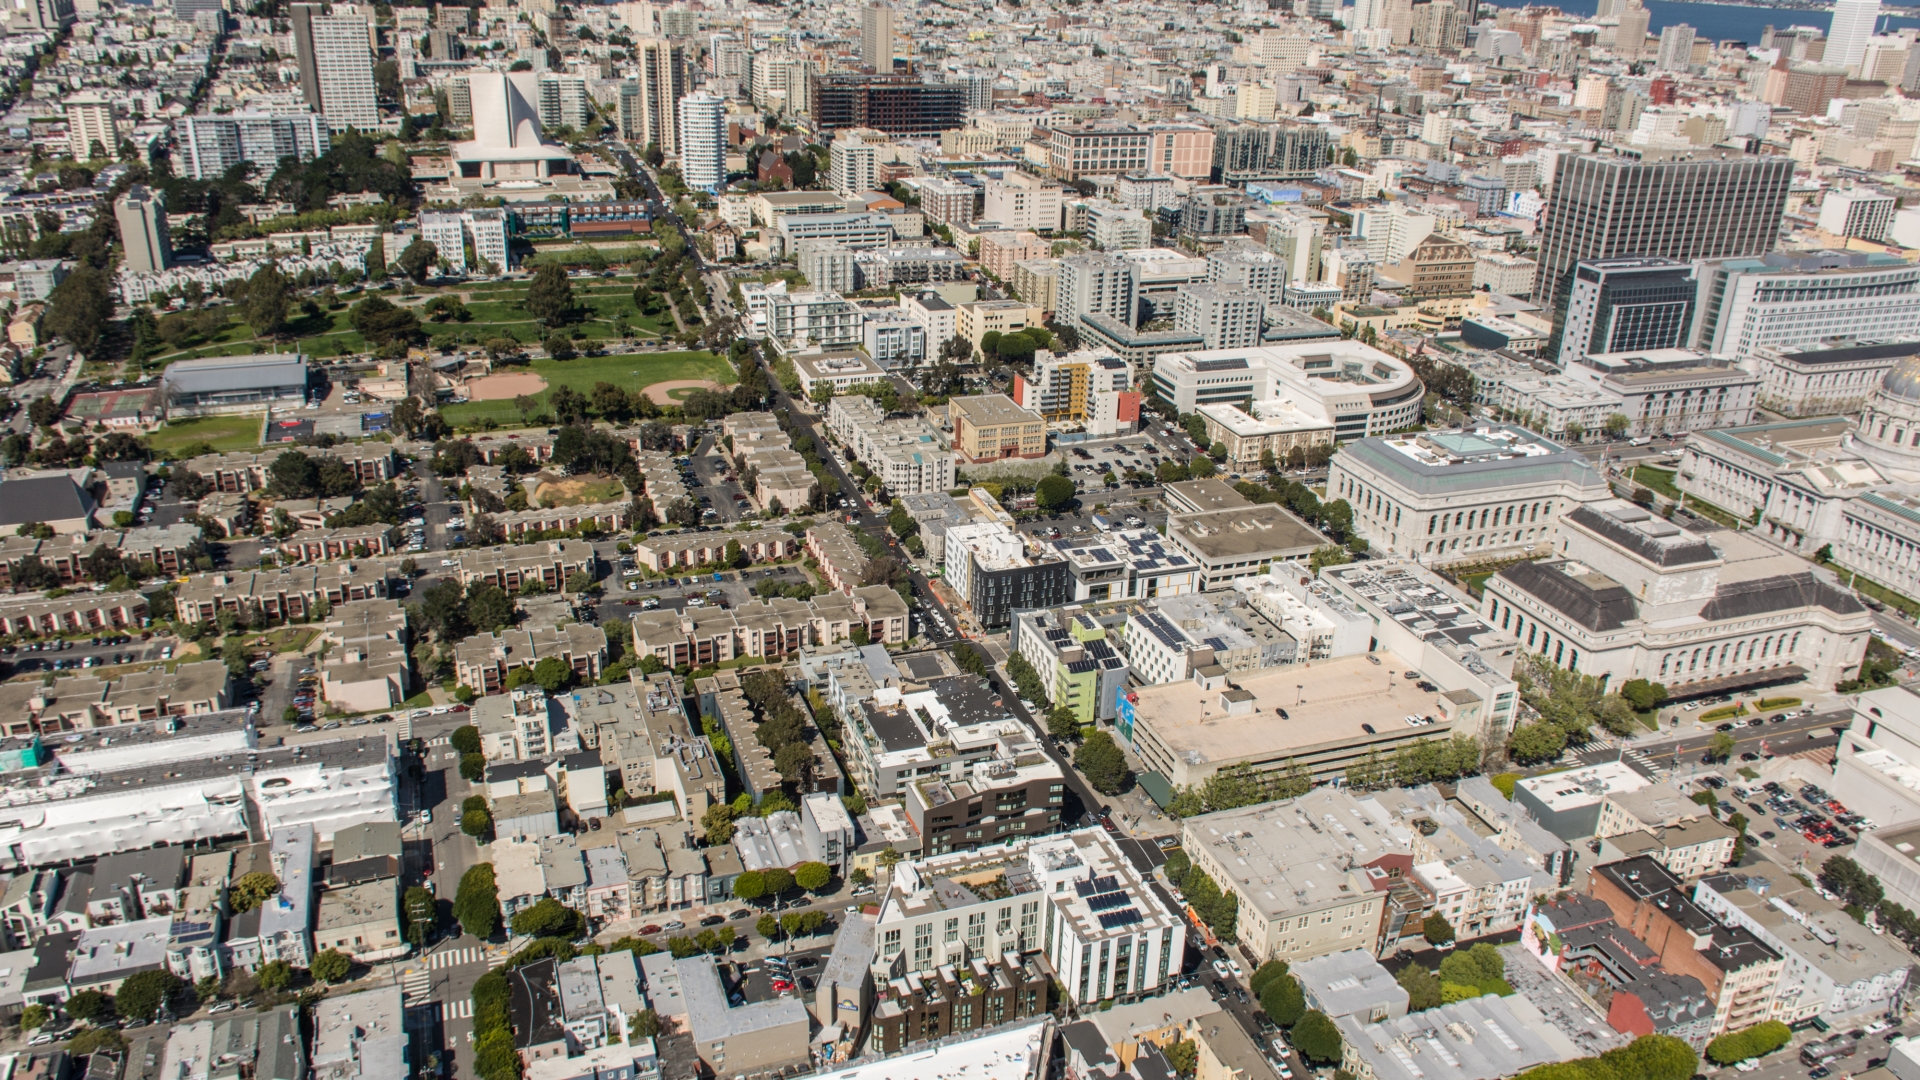 Aerial view of 300 Ivy and 388 Fulton in San Francisco, CA.